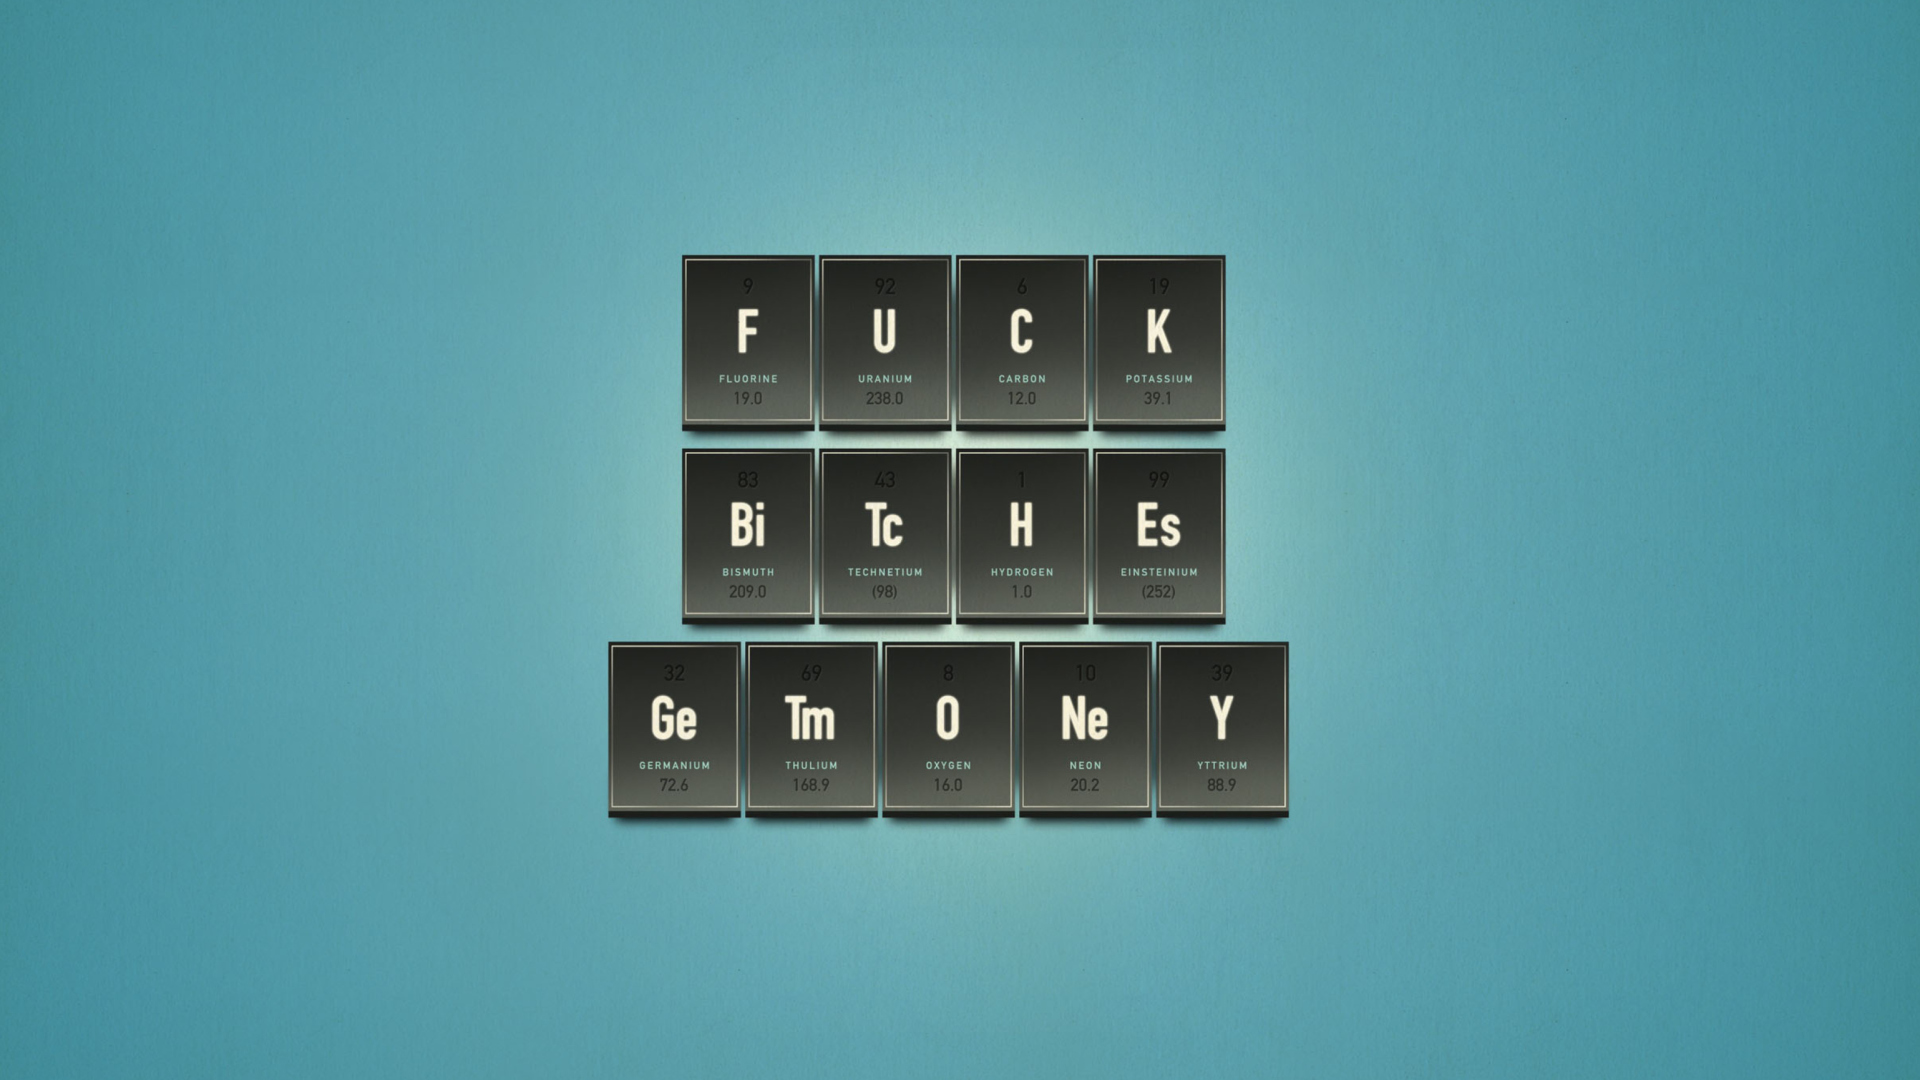 Funny Chemistry Periodic Table screenshot #1 1920x1080